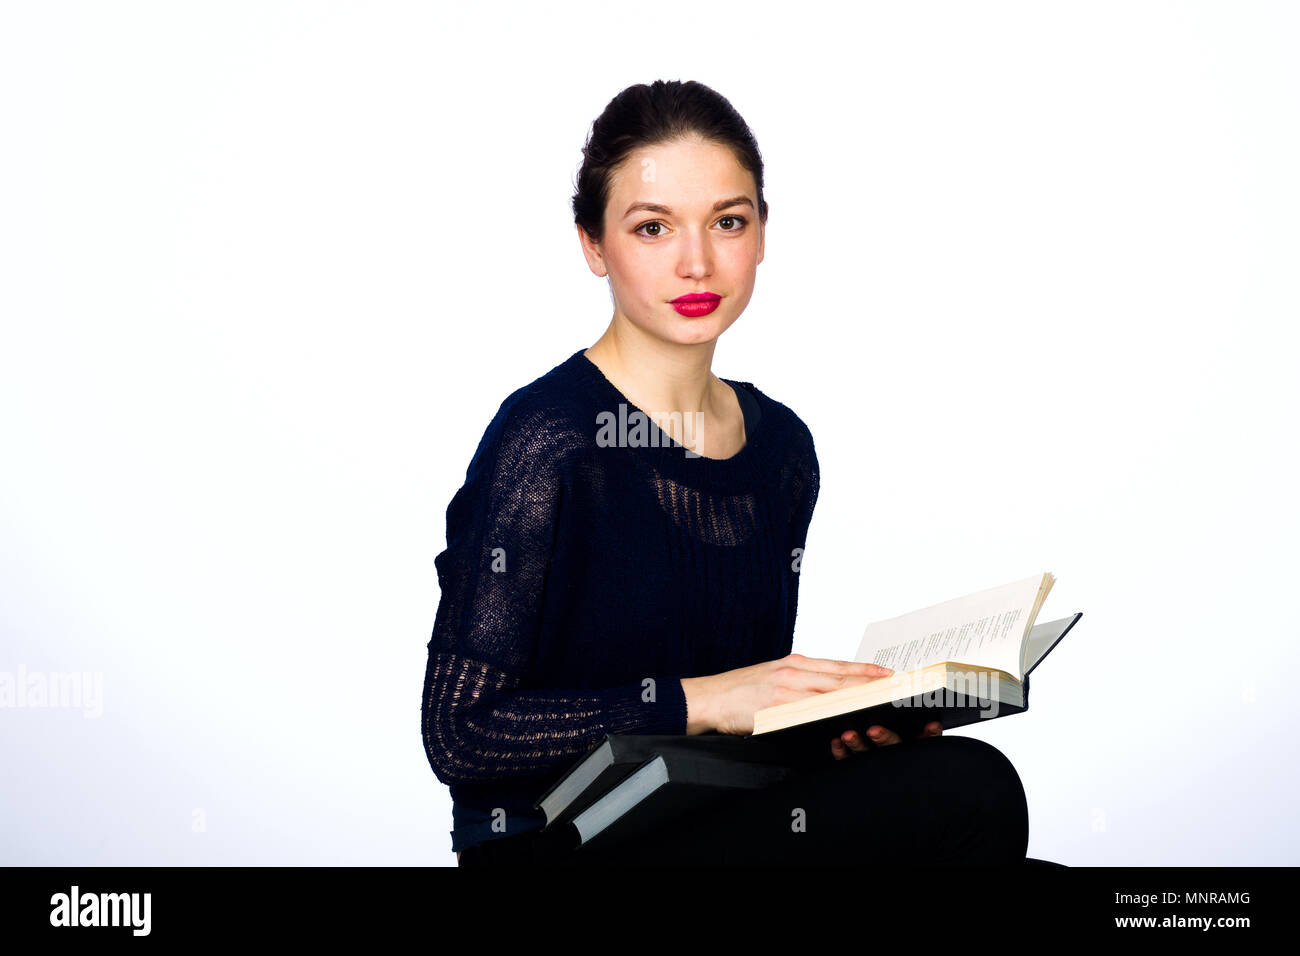 Young emotional girl with books on a white background, studio lighting Stock Photo